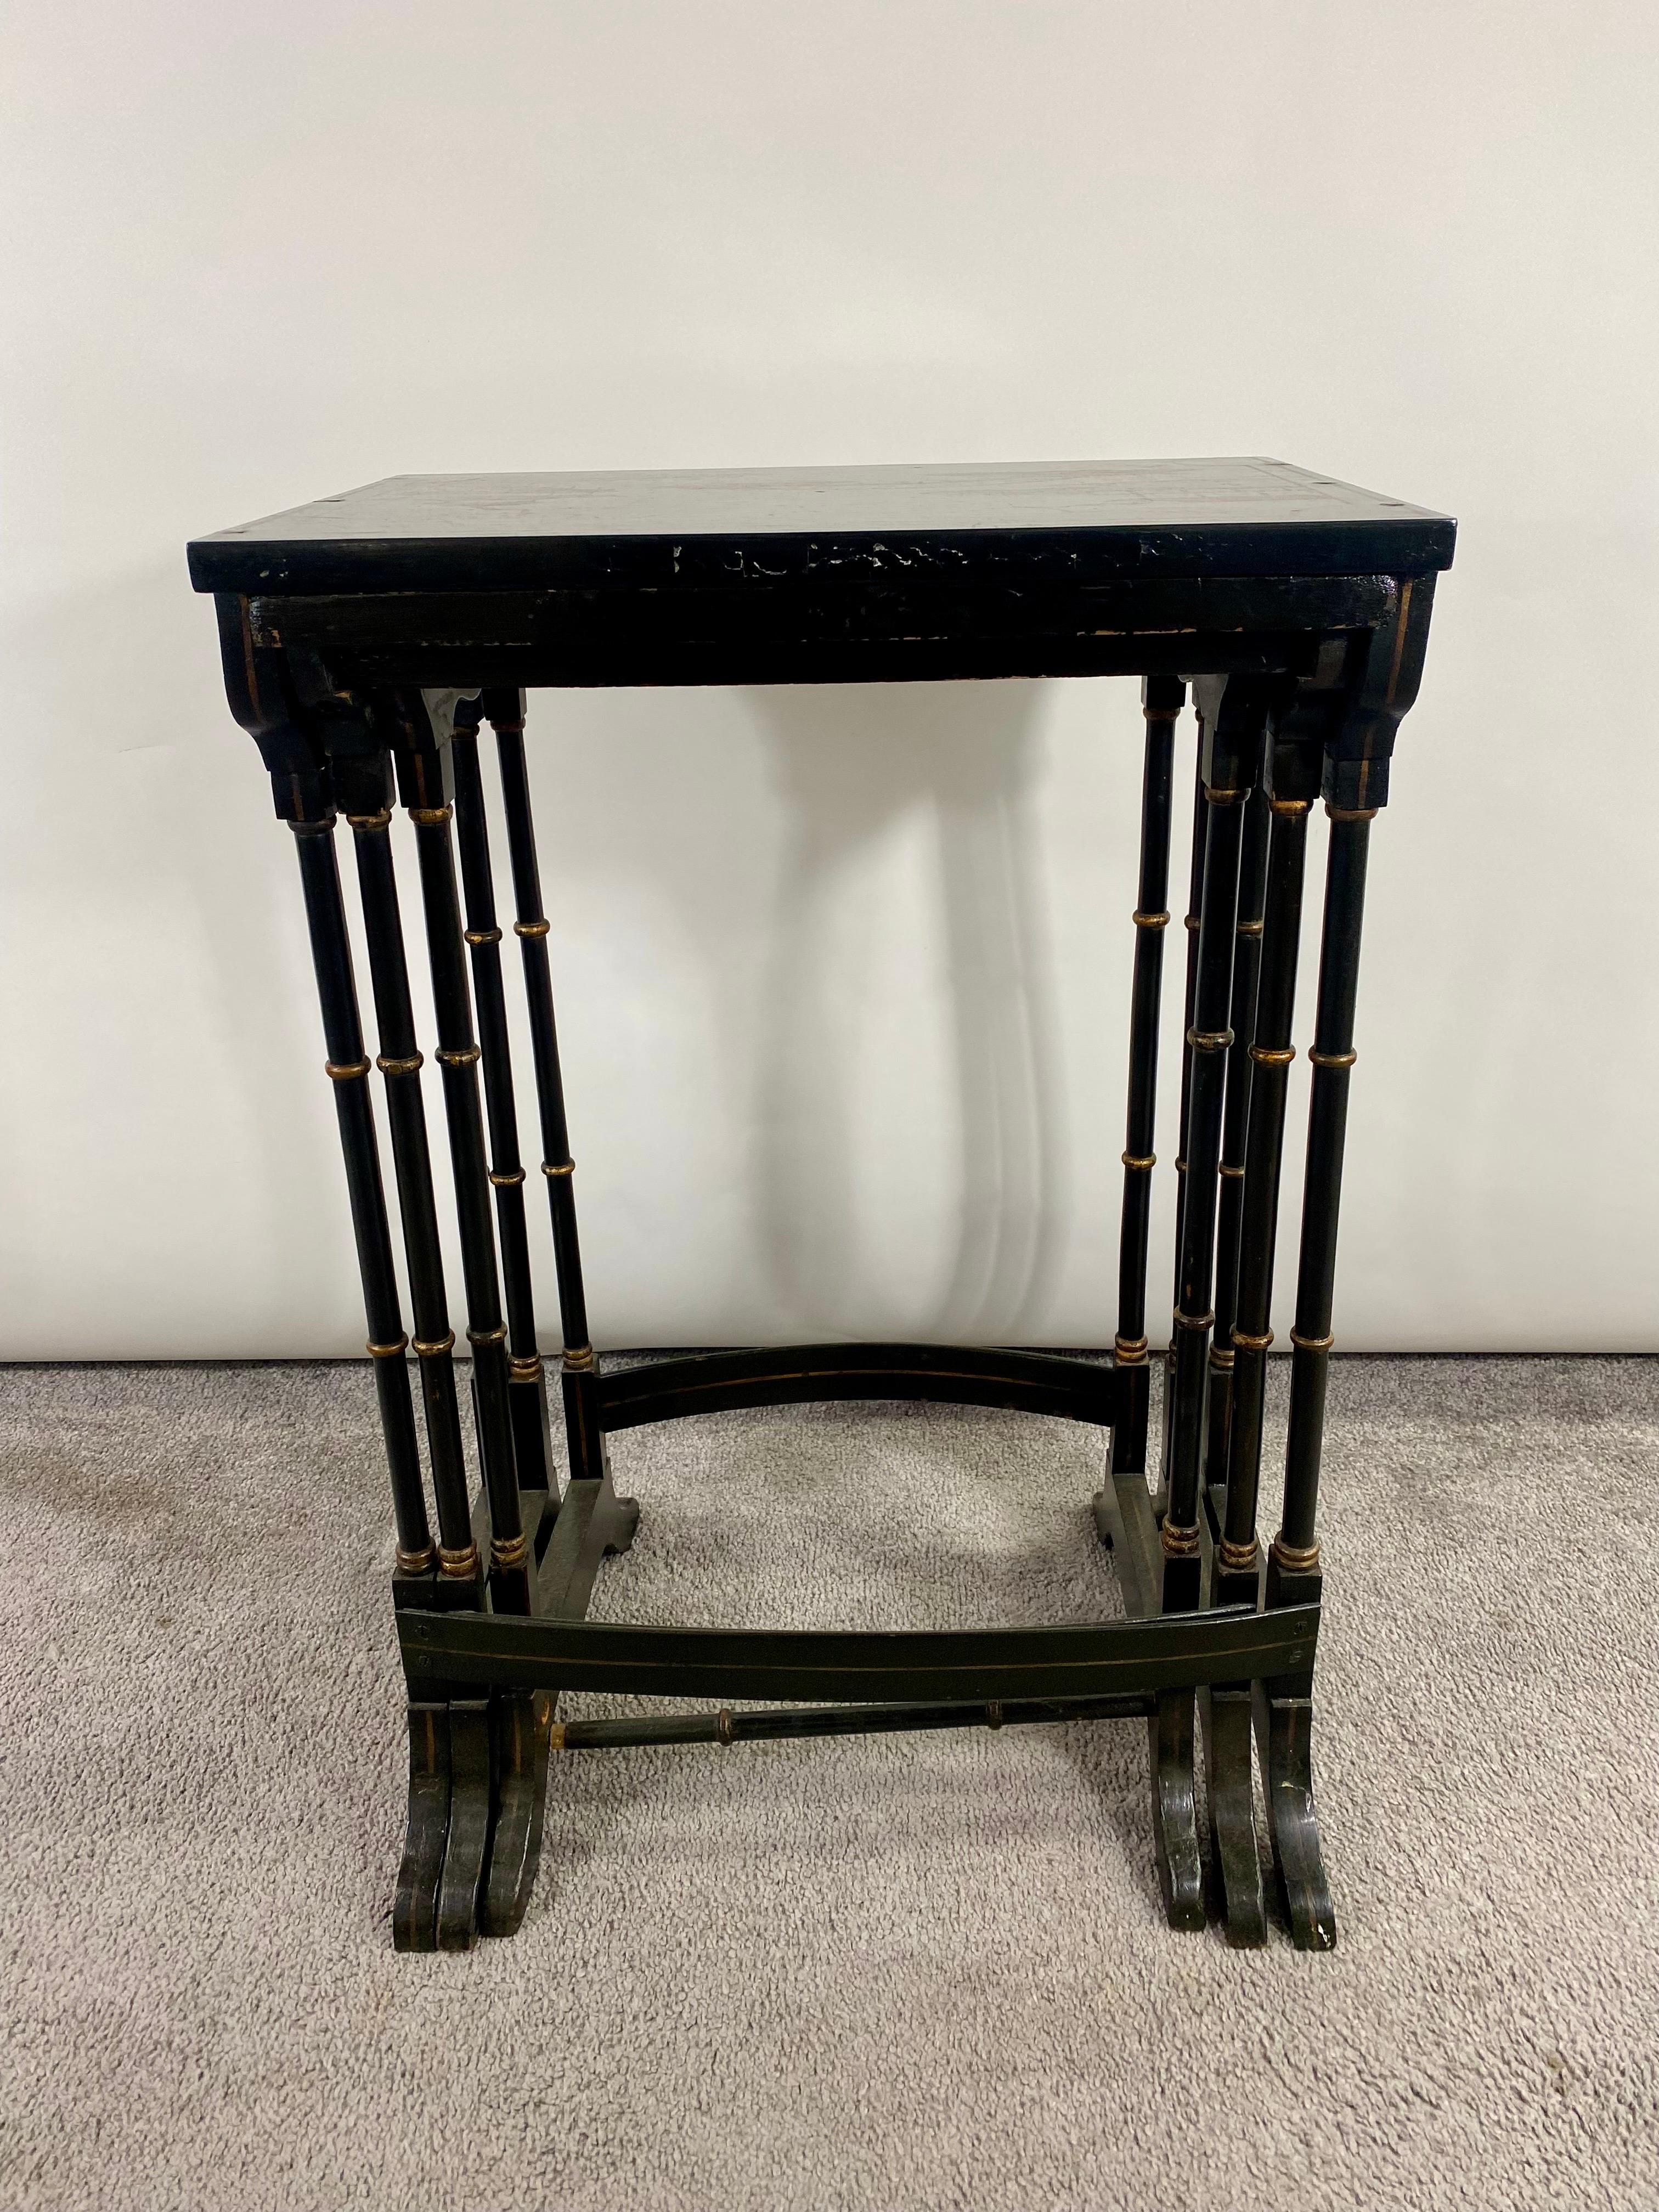 Early 20th Century Chinoiserie Black Lacquered Japanned Nesting Tables, Set of 3 For Sale 11